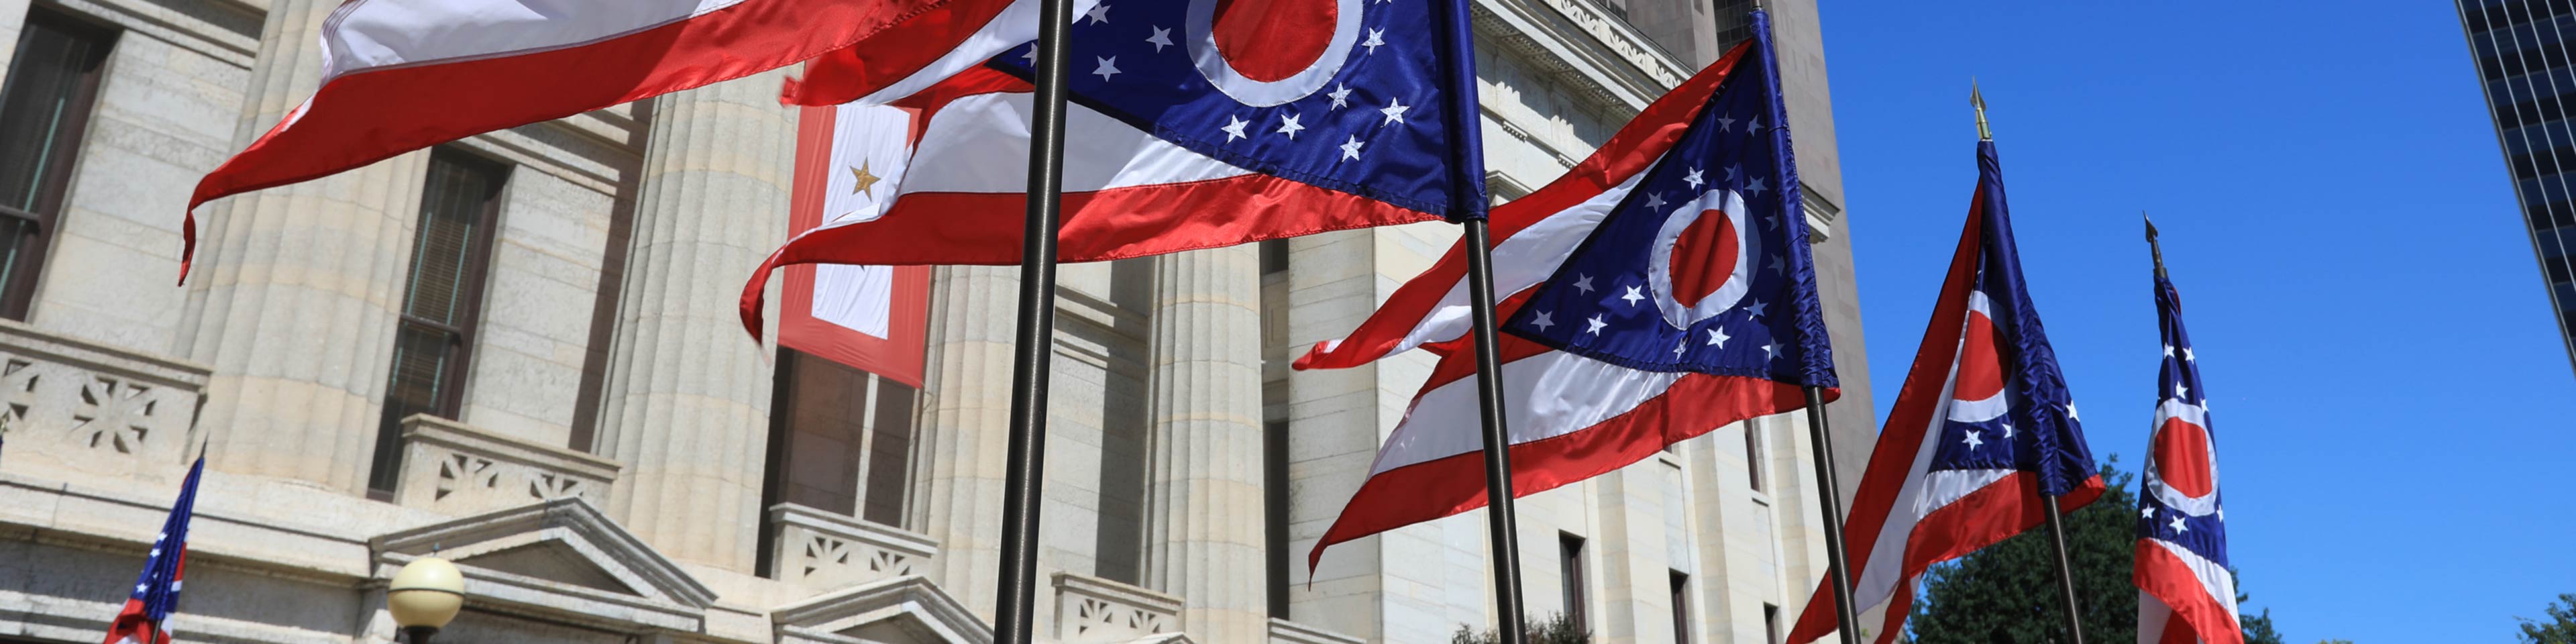 Ohio capital building with state flags out front